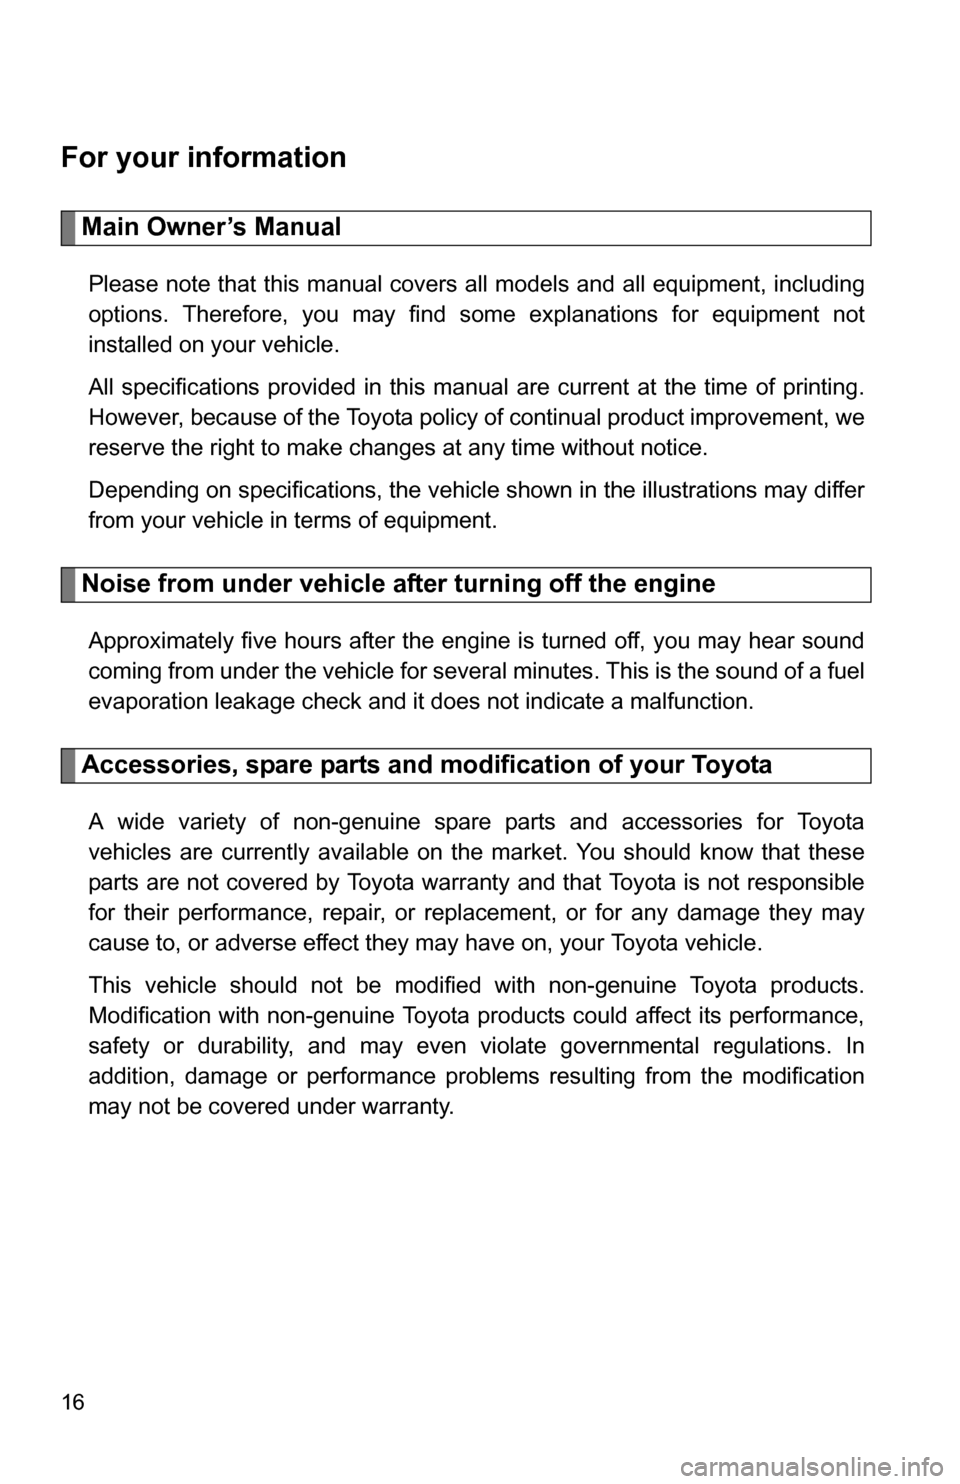 TOYOTA CAMRY HYBRID 2010 XV40 / 8.G User Guide 16
For your information
Main Owner’s Manual
Please note that this manual covers all models and all equipment, including
options. Therefore, you may find some explanations for equipment not
installed